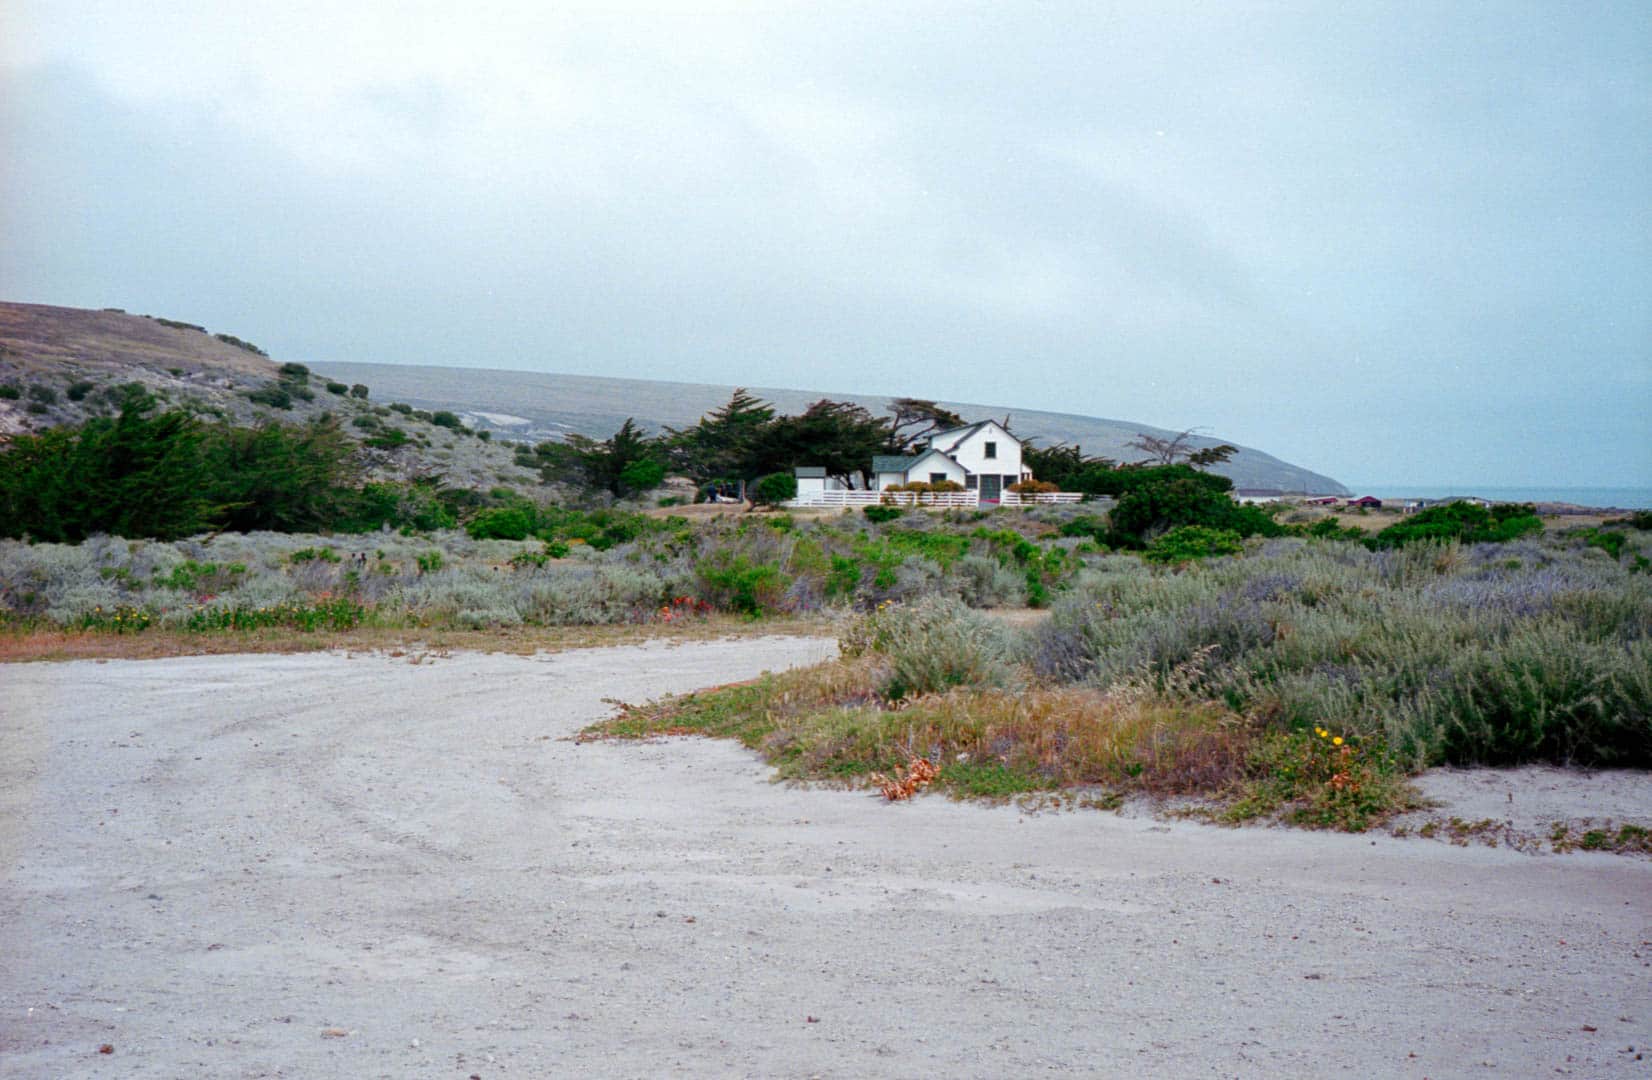 A white house in the distance amidst a grassy costal landscape